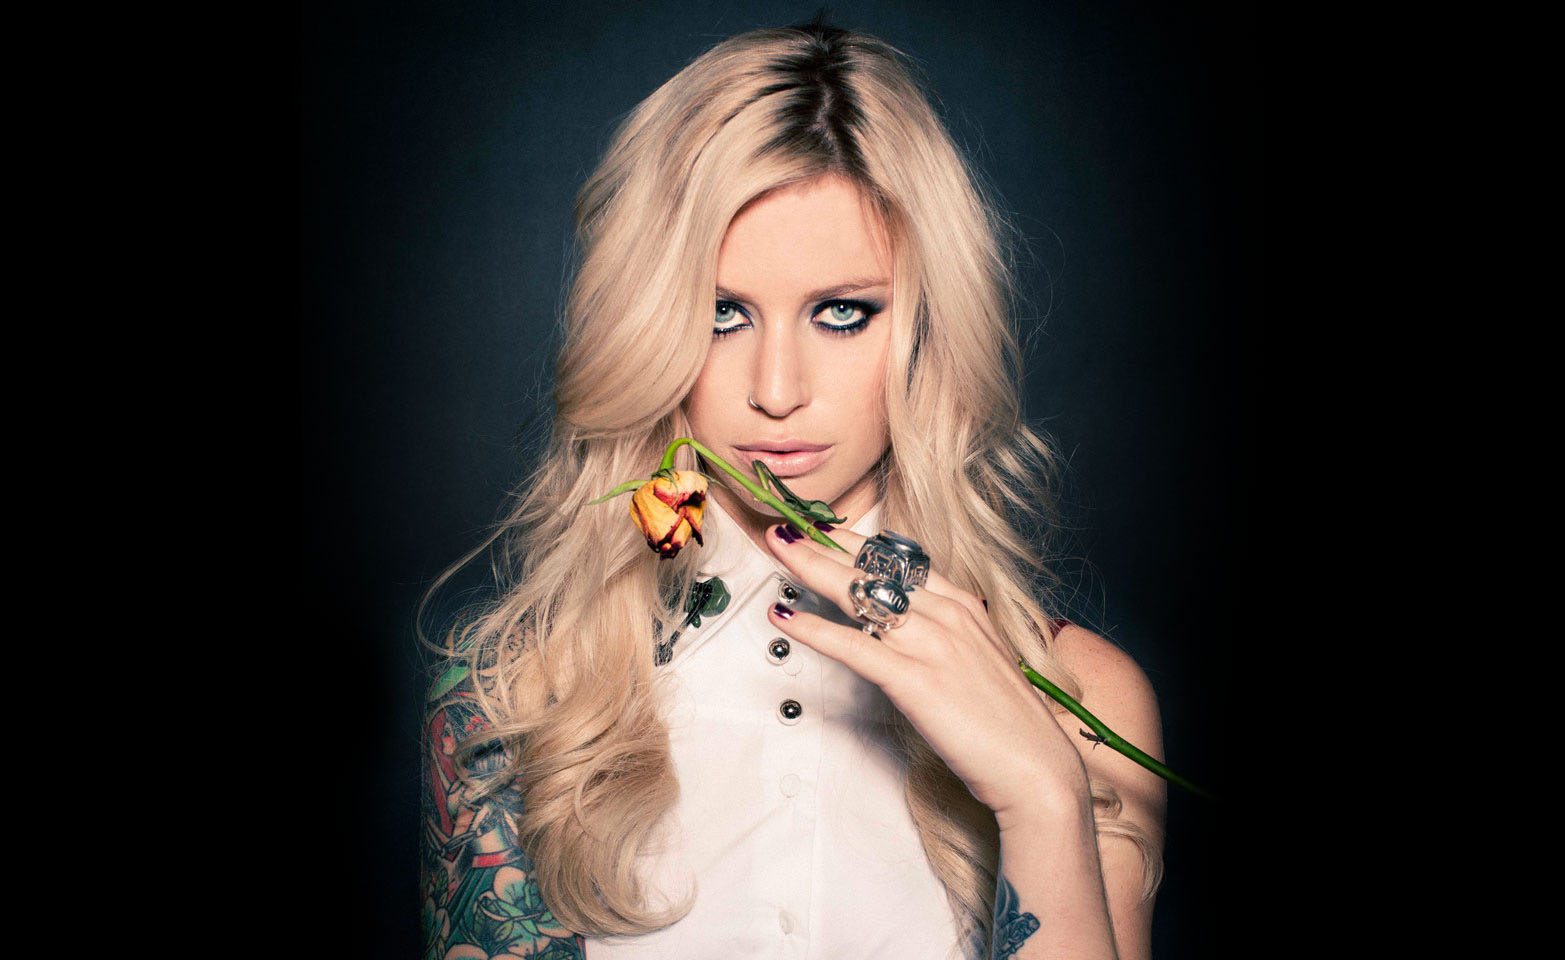 Gin Wigmore @ The Standard 25.8.12 | FROM THE PIT | OFFICIAL SITE